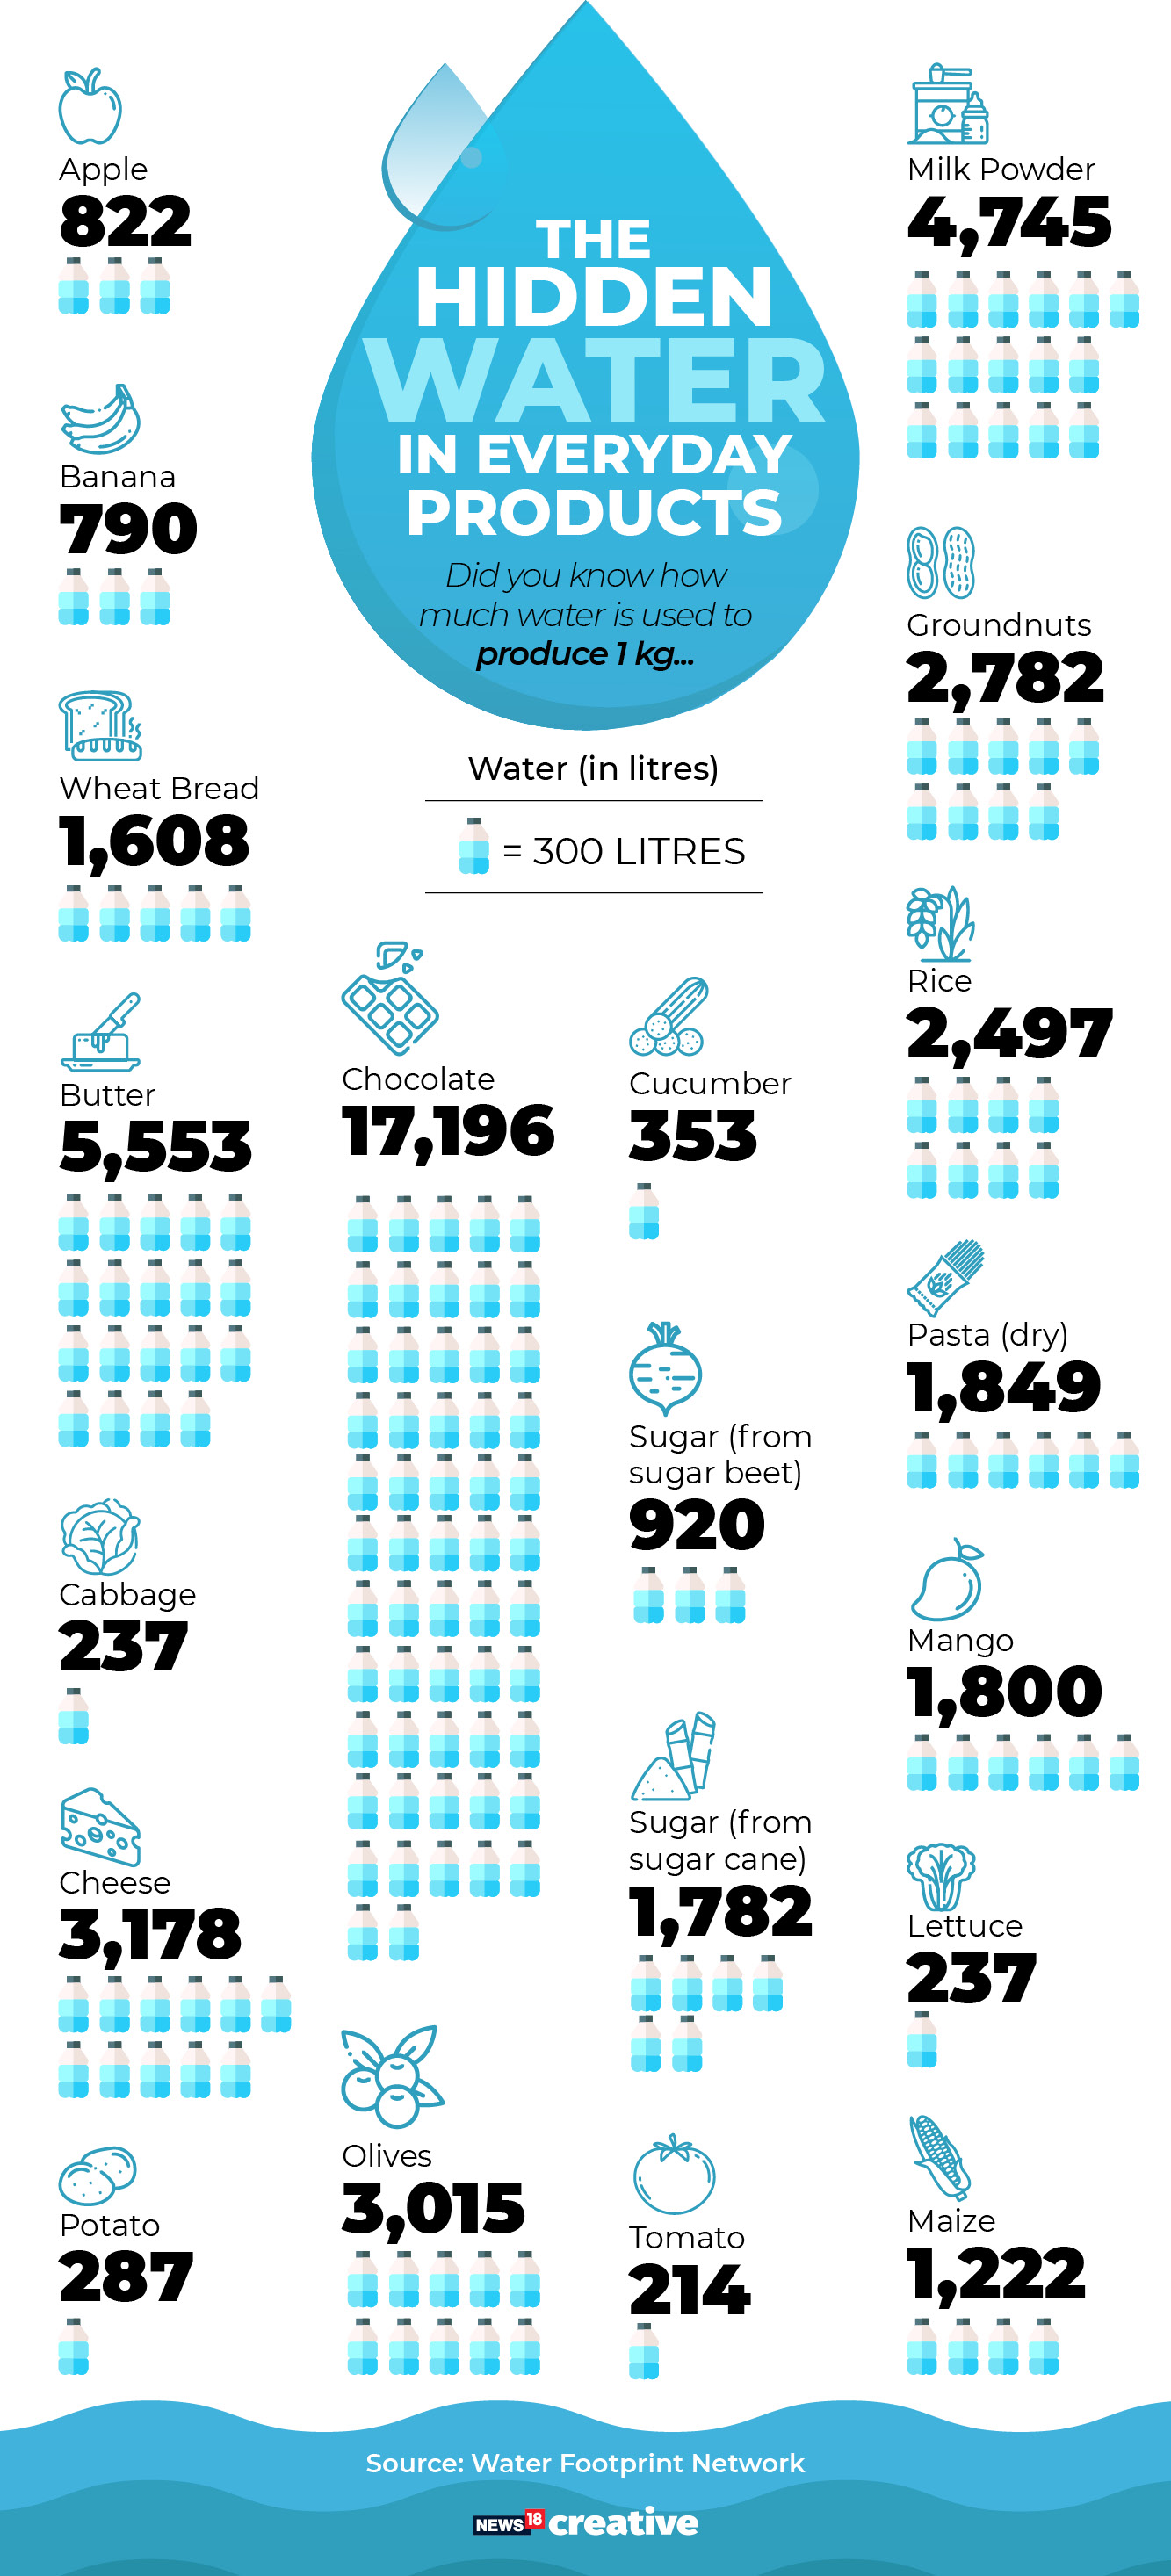 From bananas to sugar: How much water is used to make 1 kg of these food items